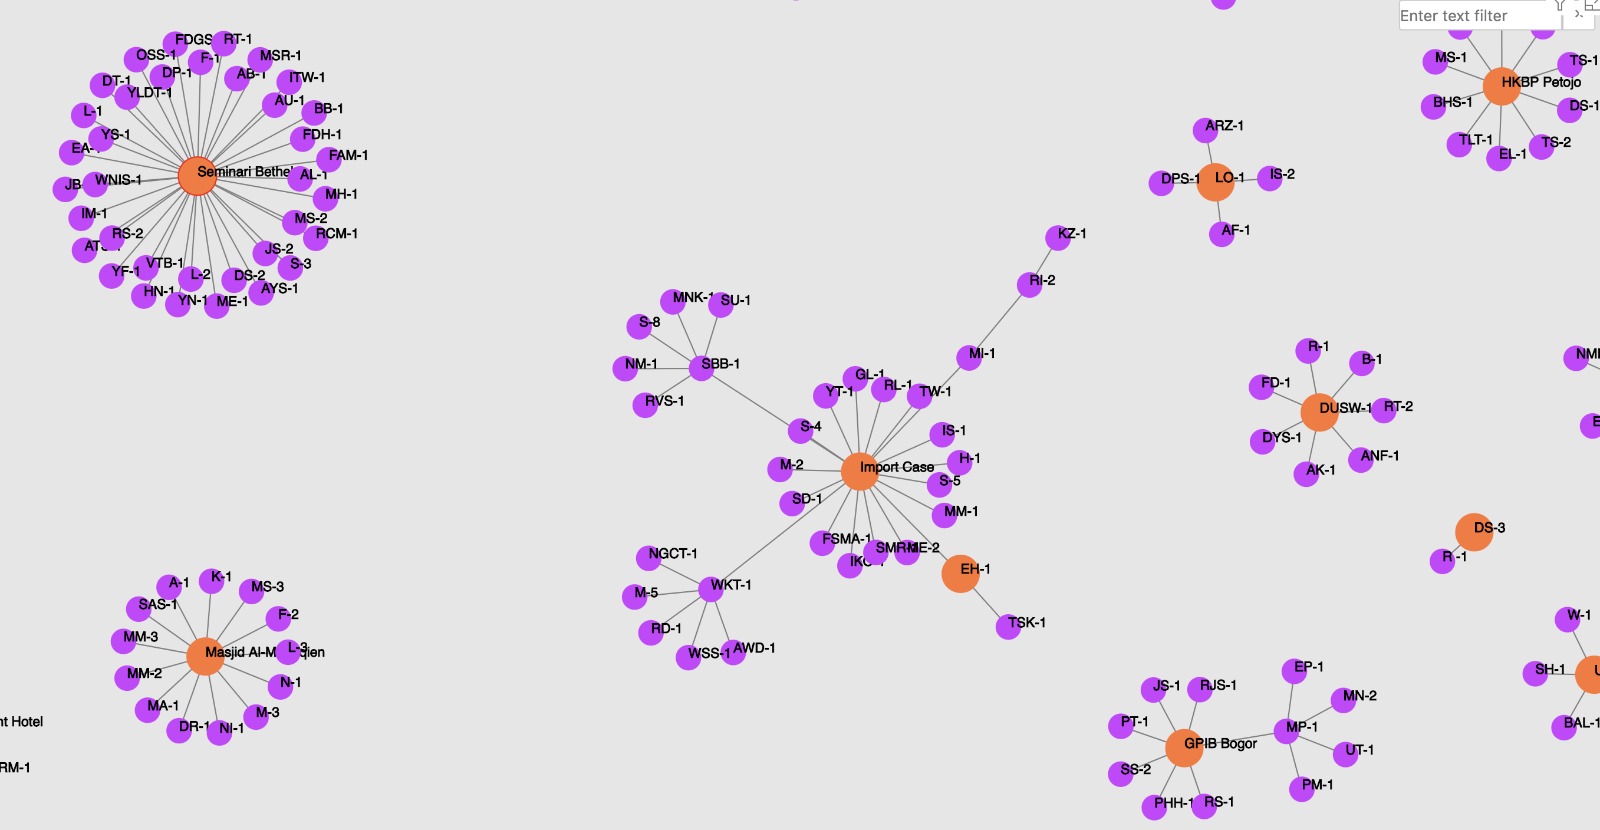 Network Graph of the Spread of COVID-19